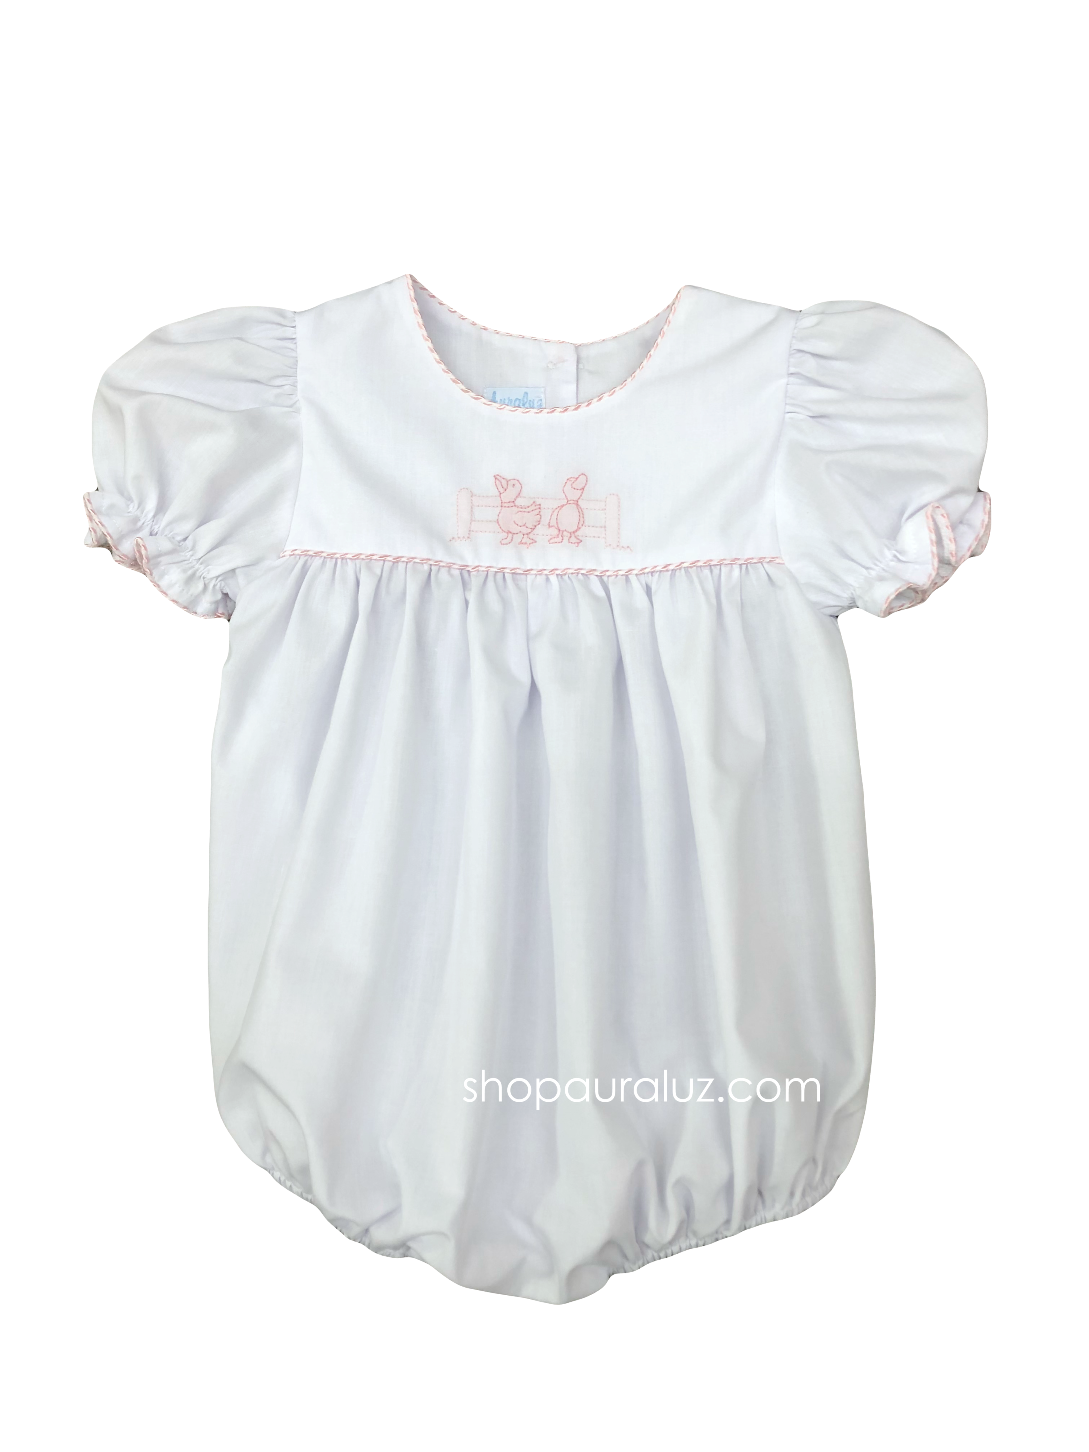 Auraluz Girl Bubble..White with pink shiny cord trim, no collar and embroidered ducks